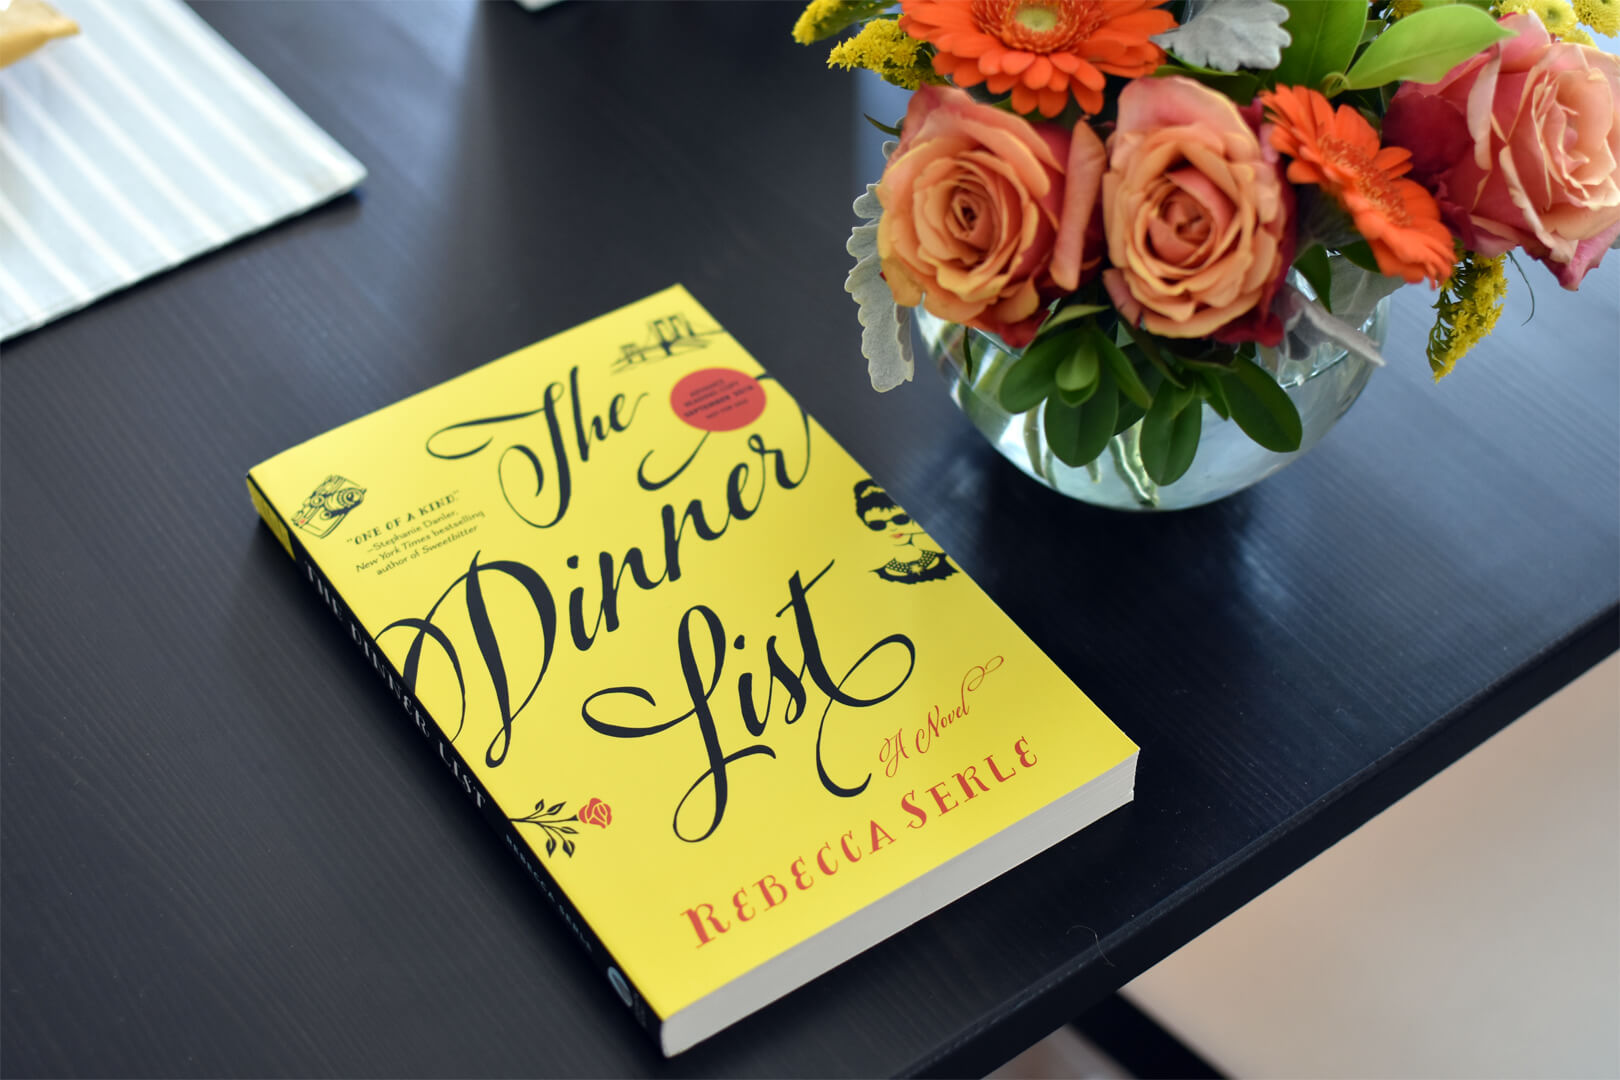 Preview: The Dinner List by Rebecca Serle